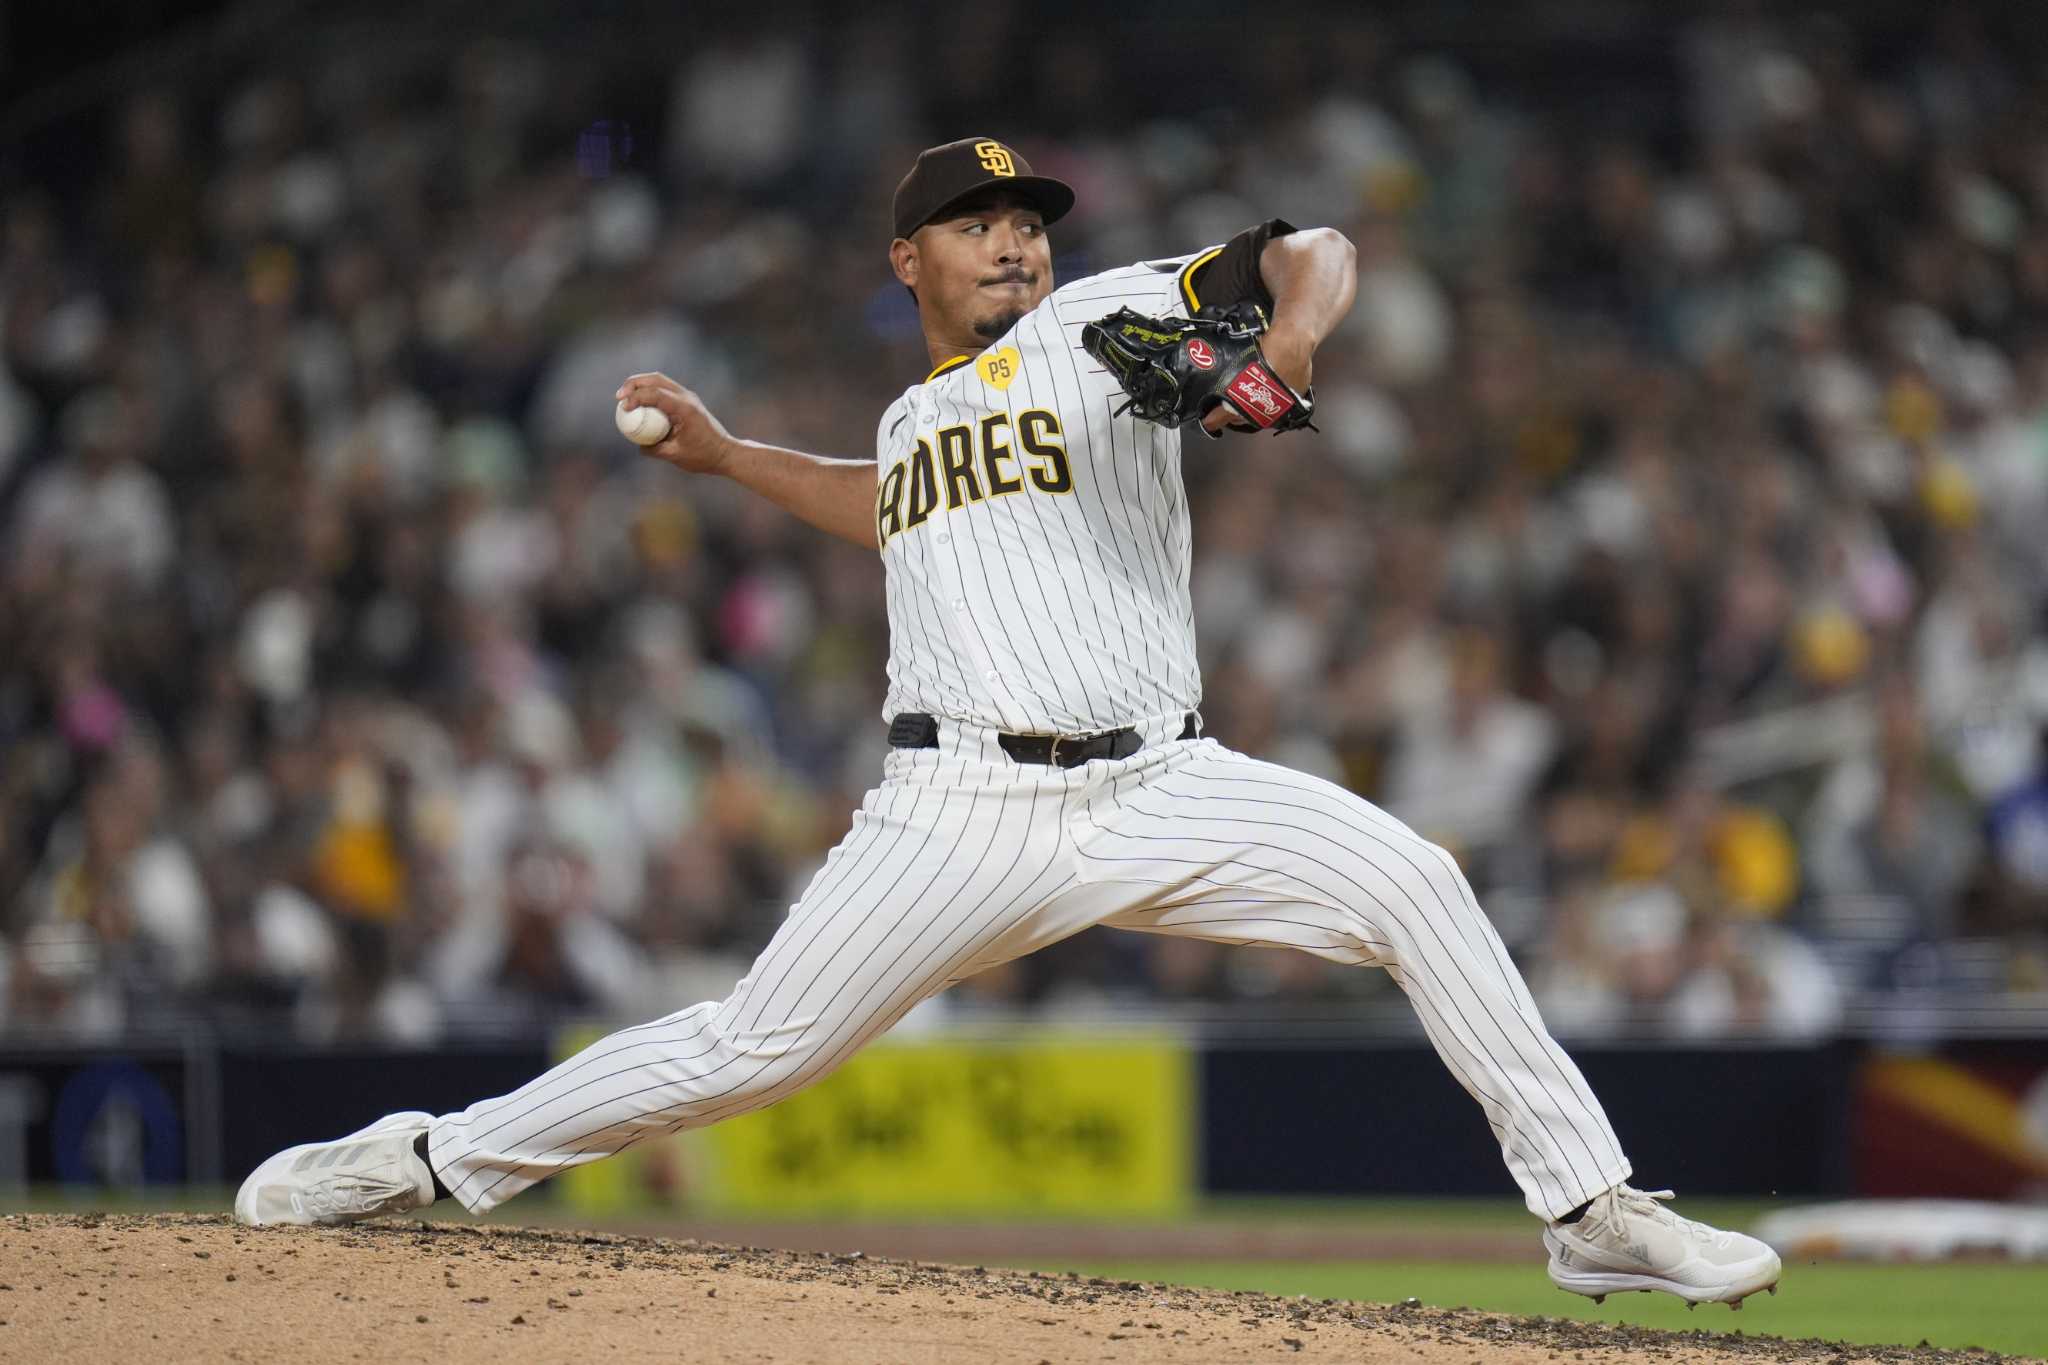 Profar homers and Estrada sets expansion-era strikeout record as the Padres beat the Marlins 4-0